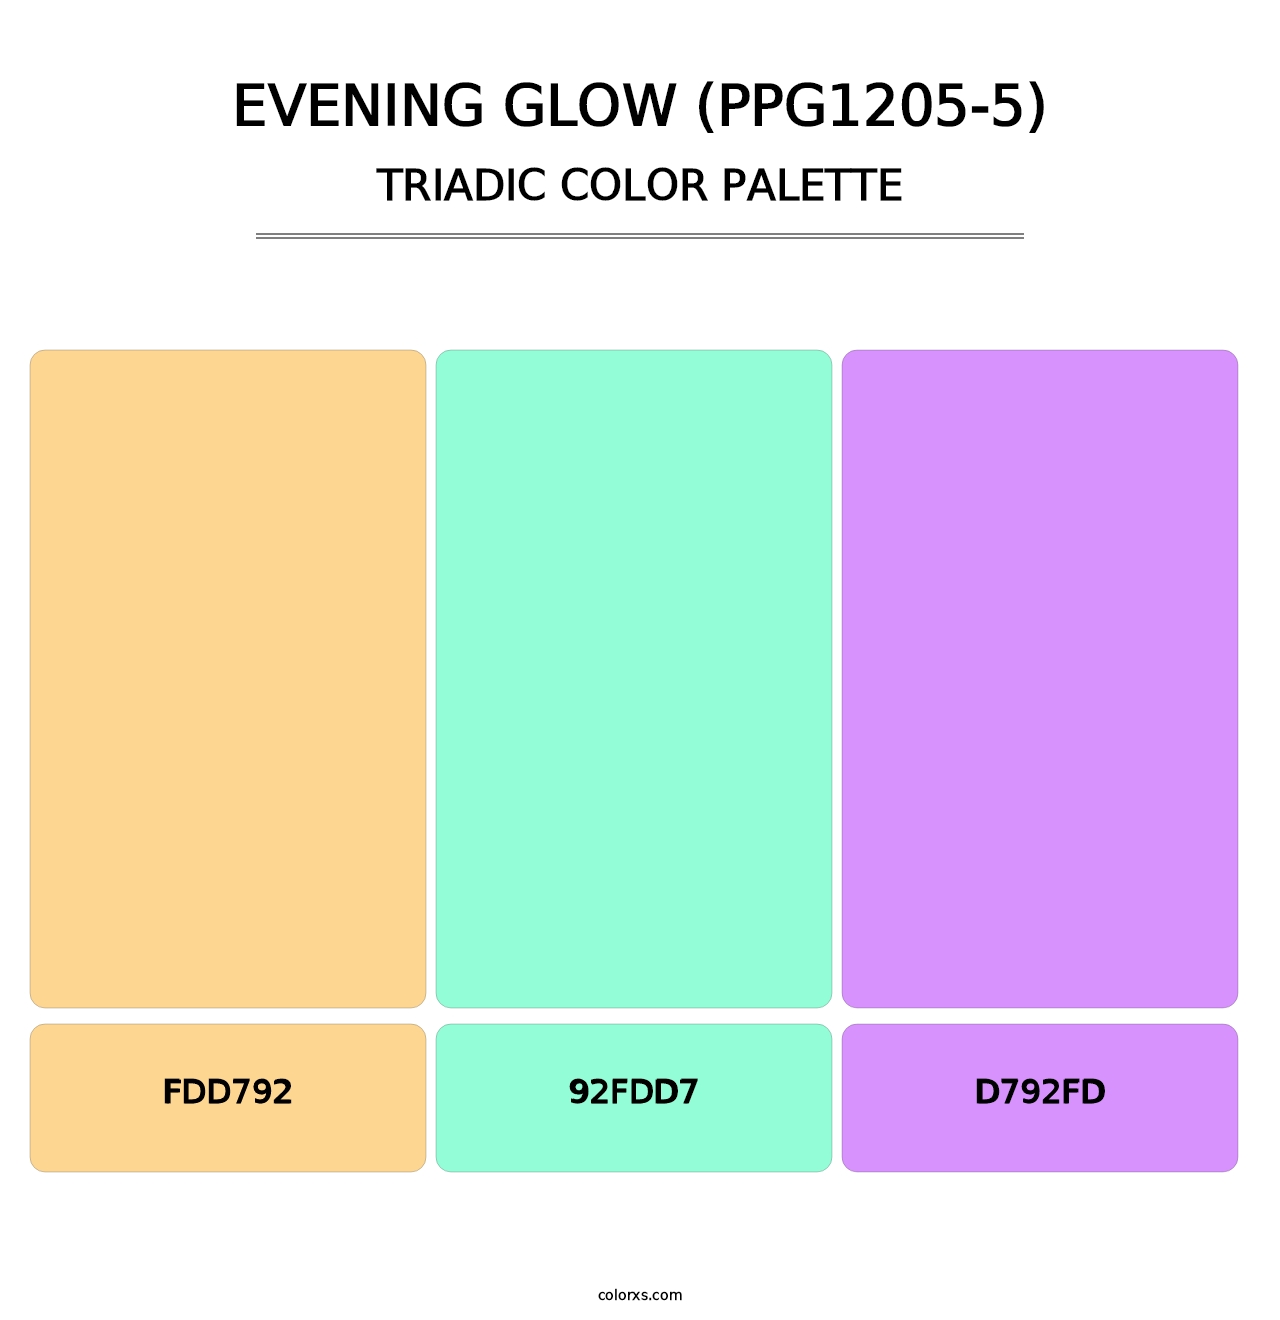 Evening Glow (PPG1205-5) - Triadic Color Palette